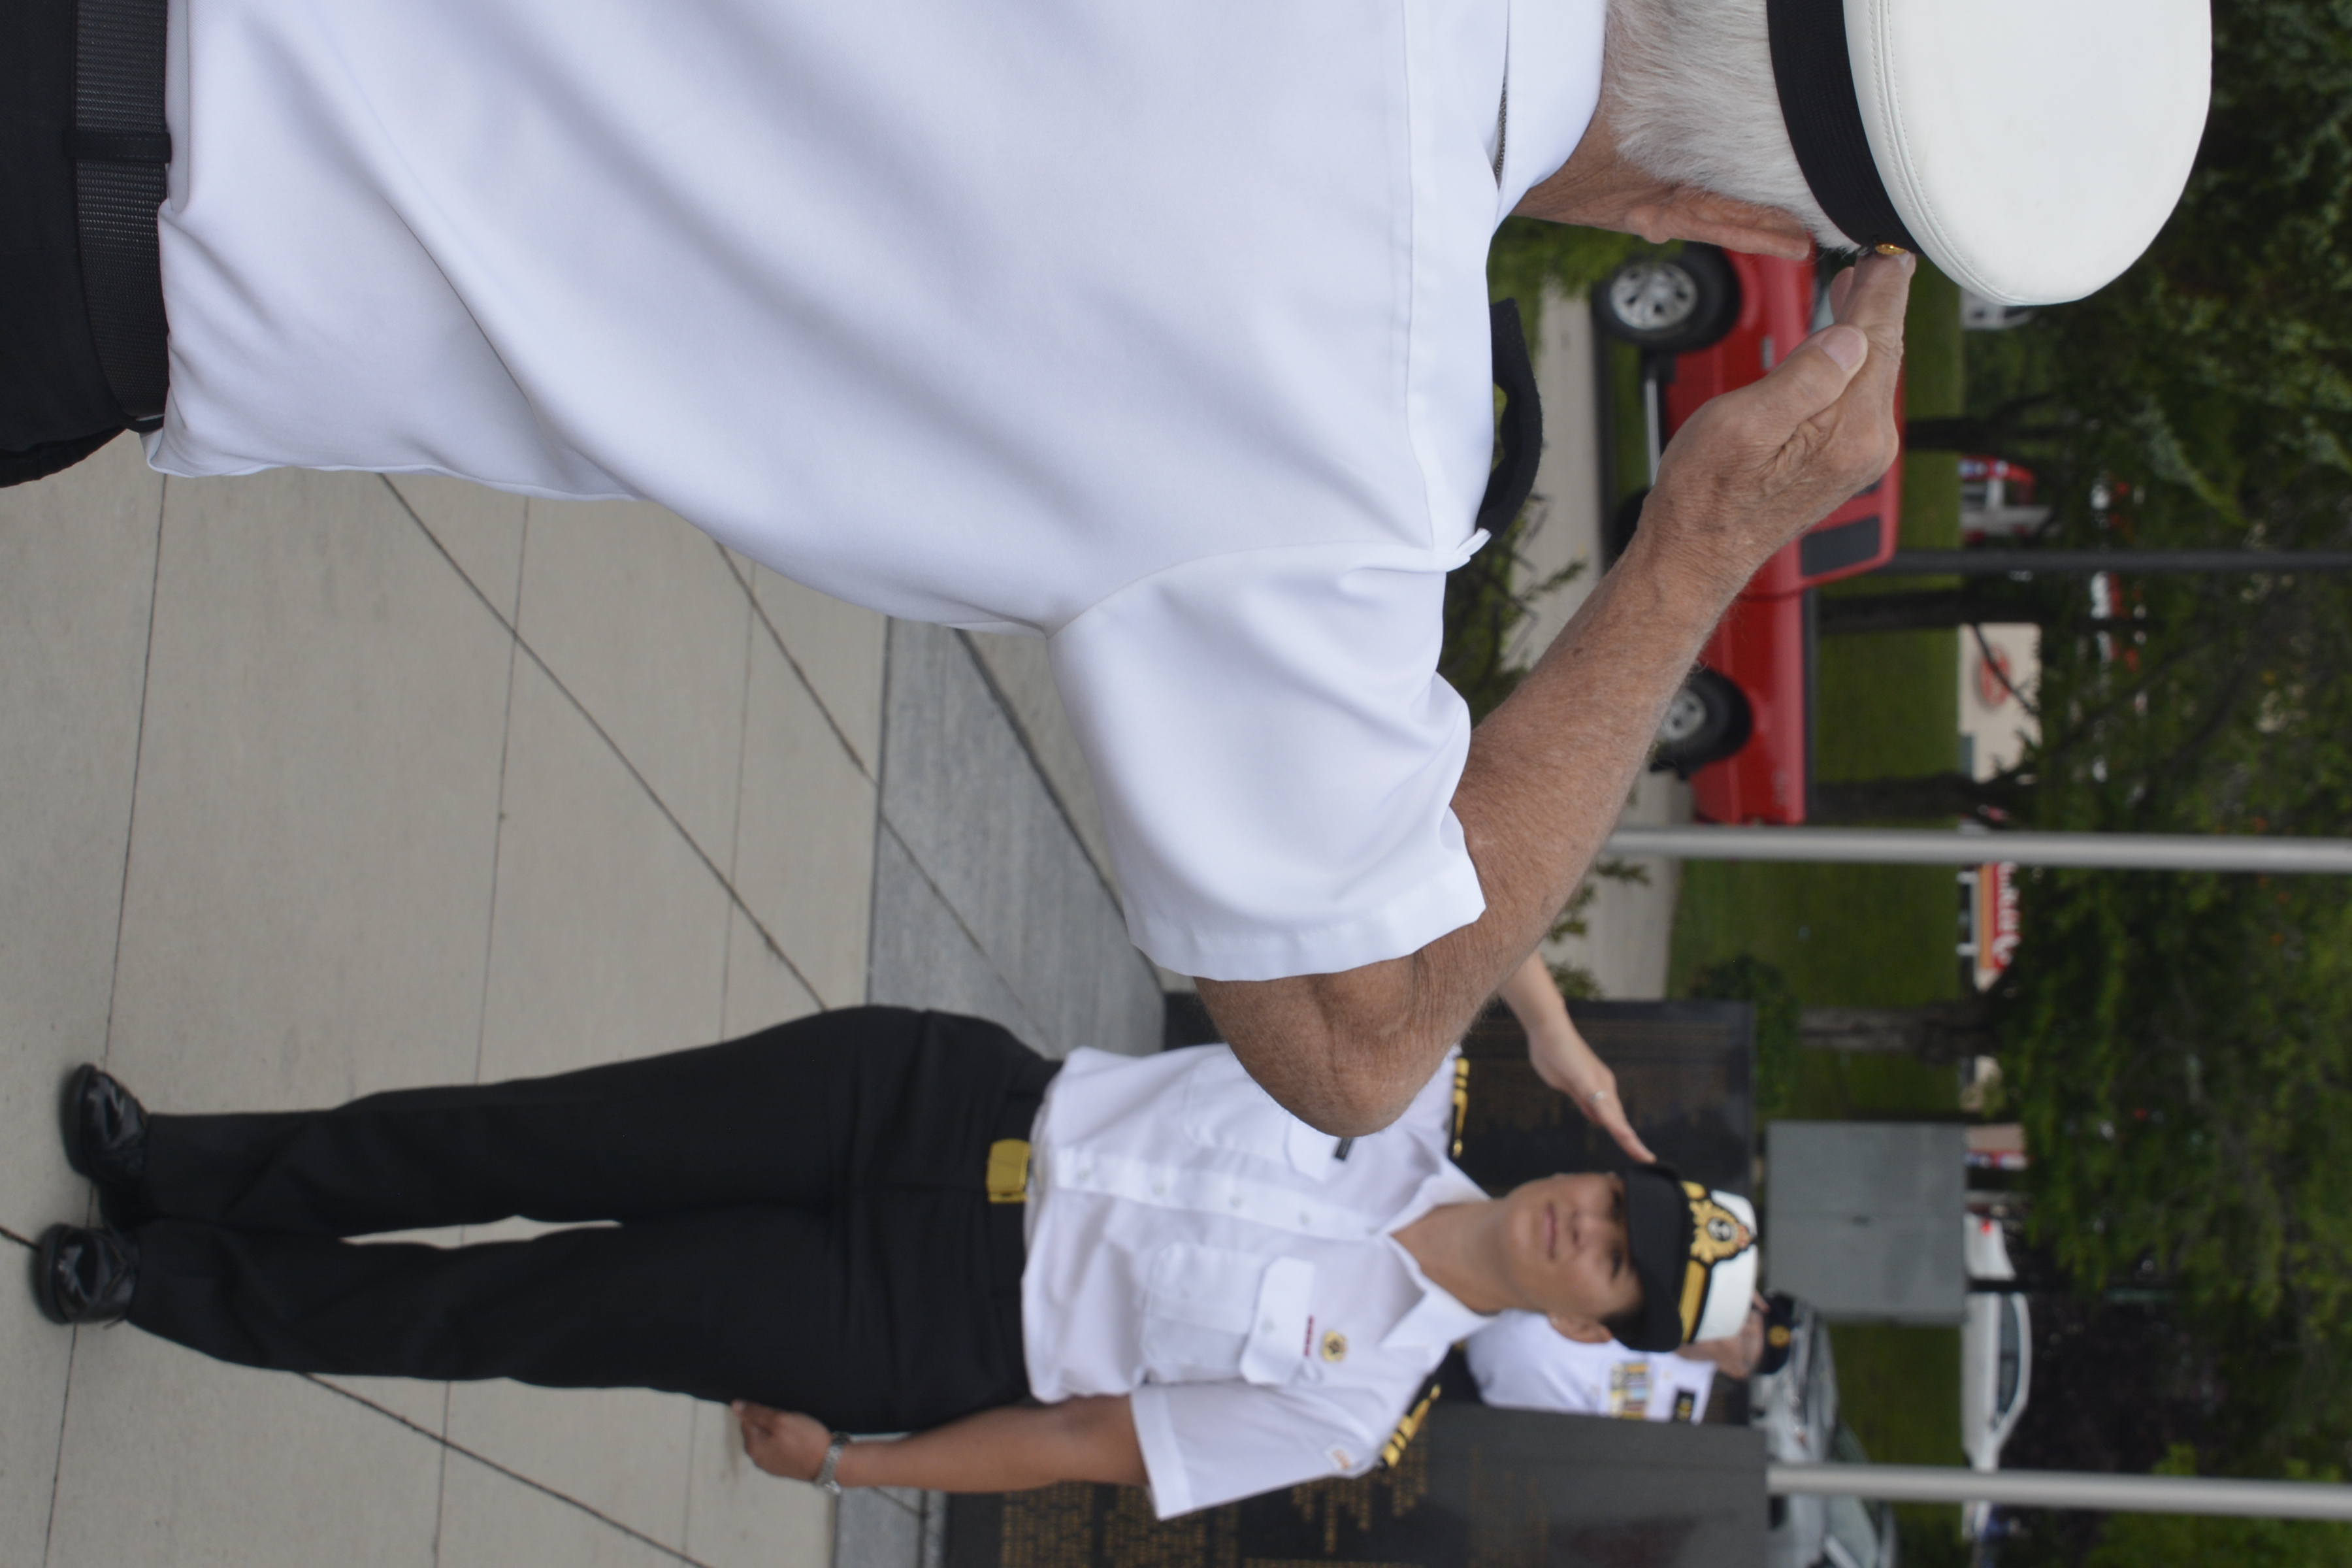 Parade Commander reports to the Reviewing Officer LCdr Sowa, CO of HMCS STAR